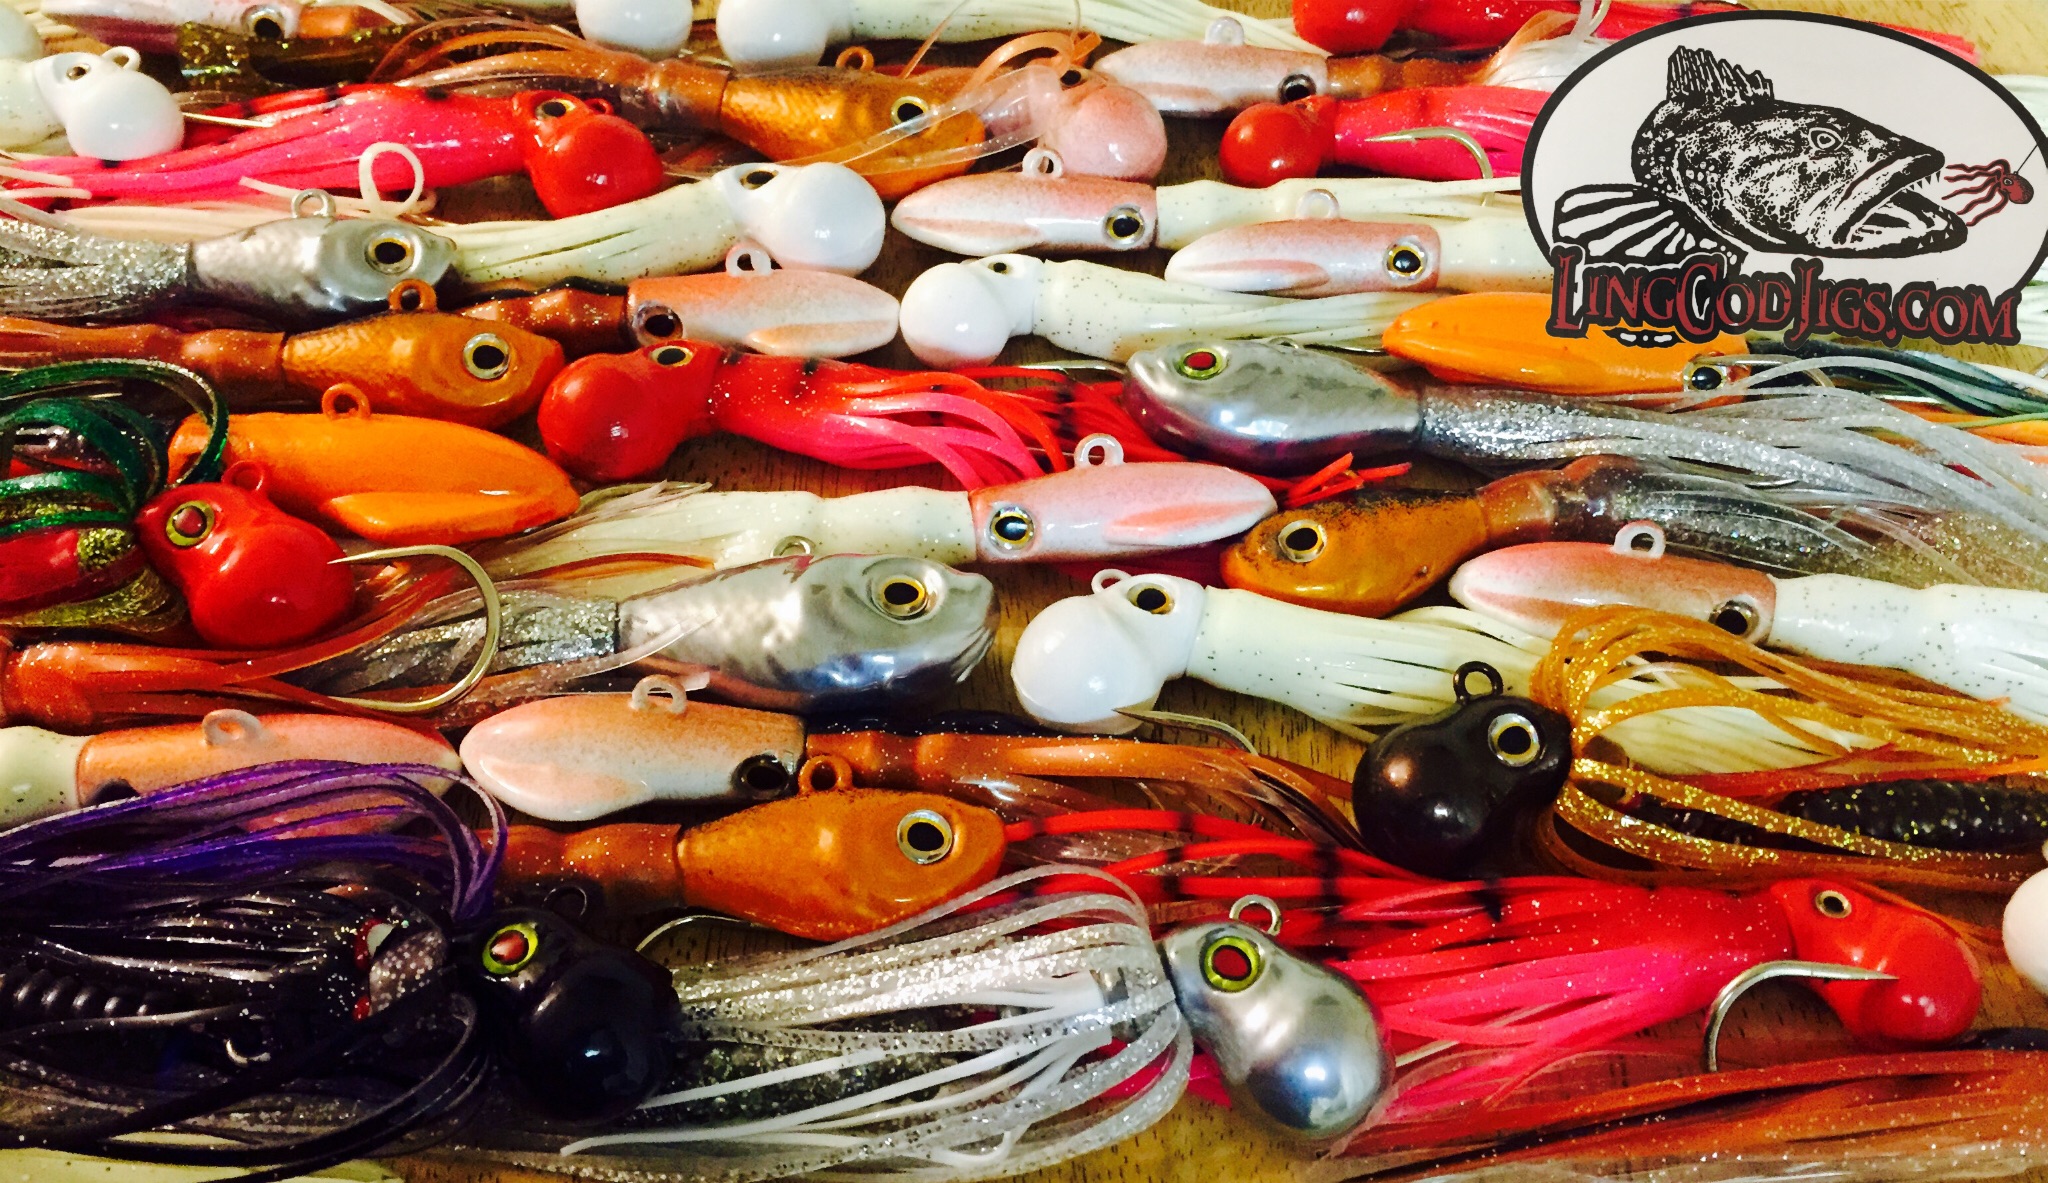 Whats the best Ling cod Jig? - Best Ling Cod jigs and luresBest